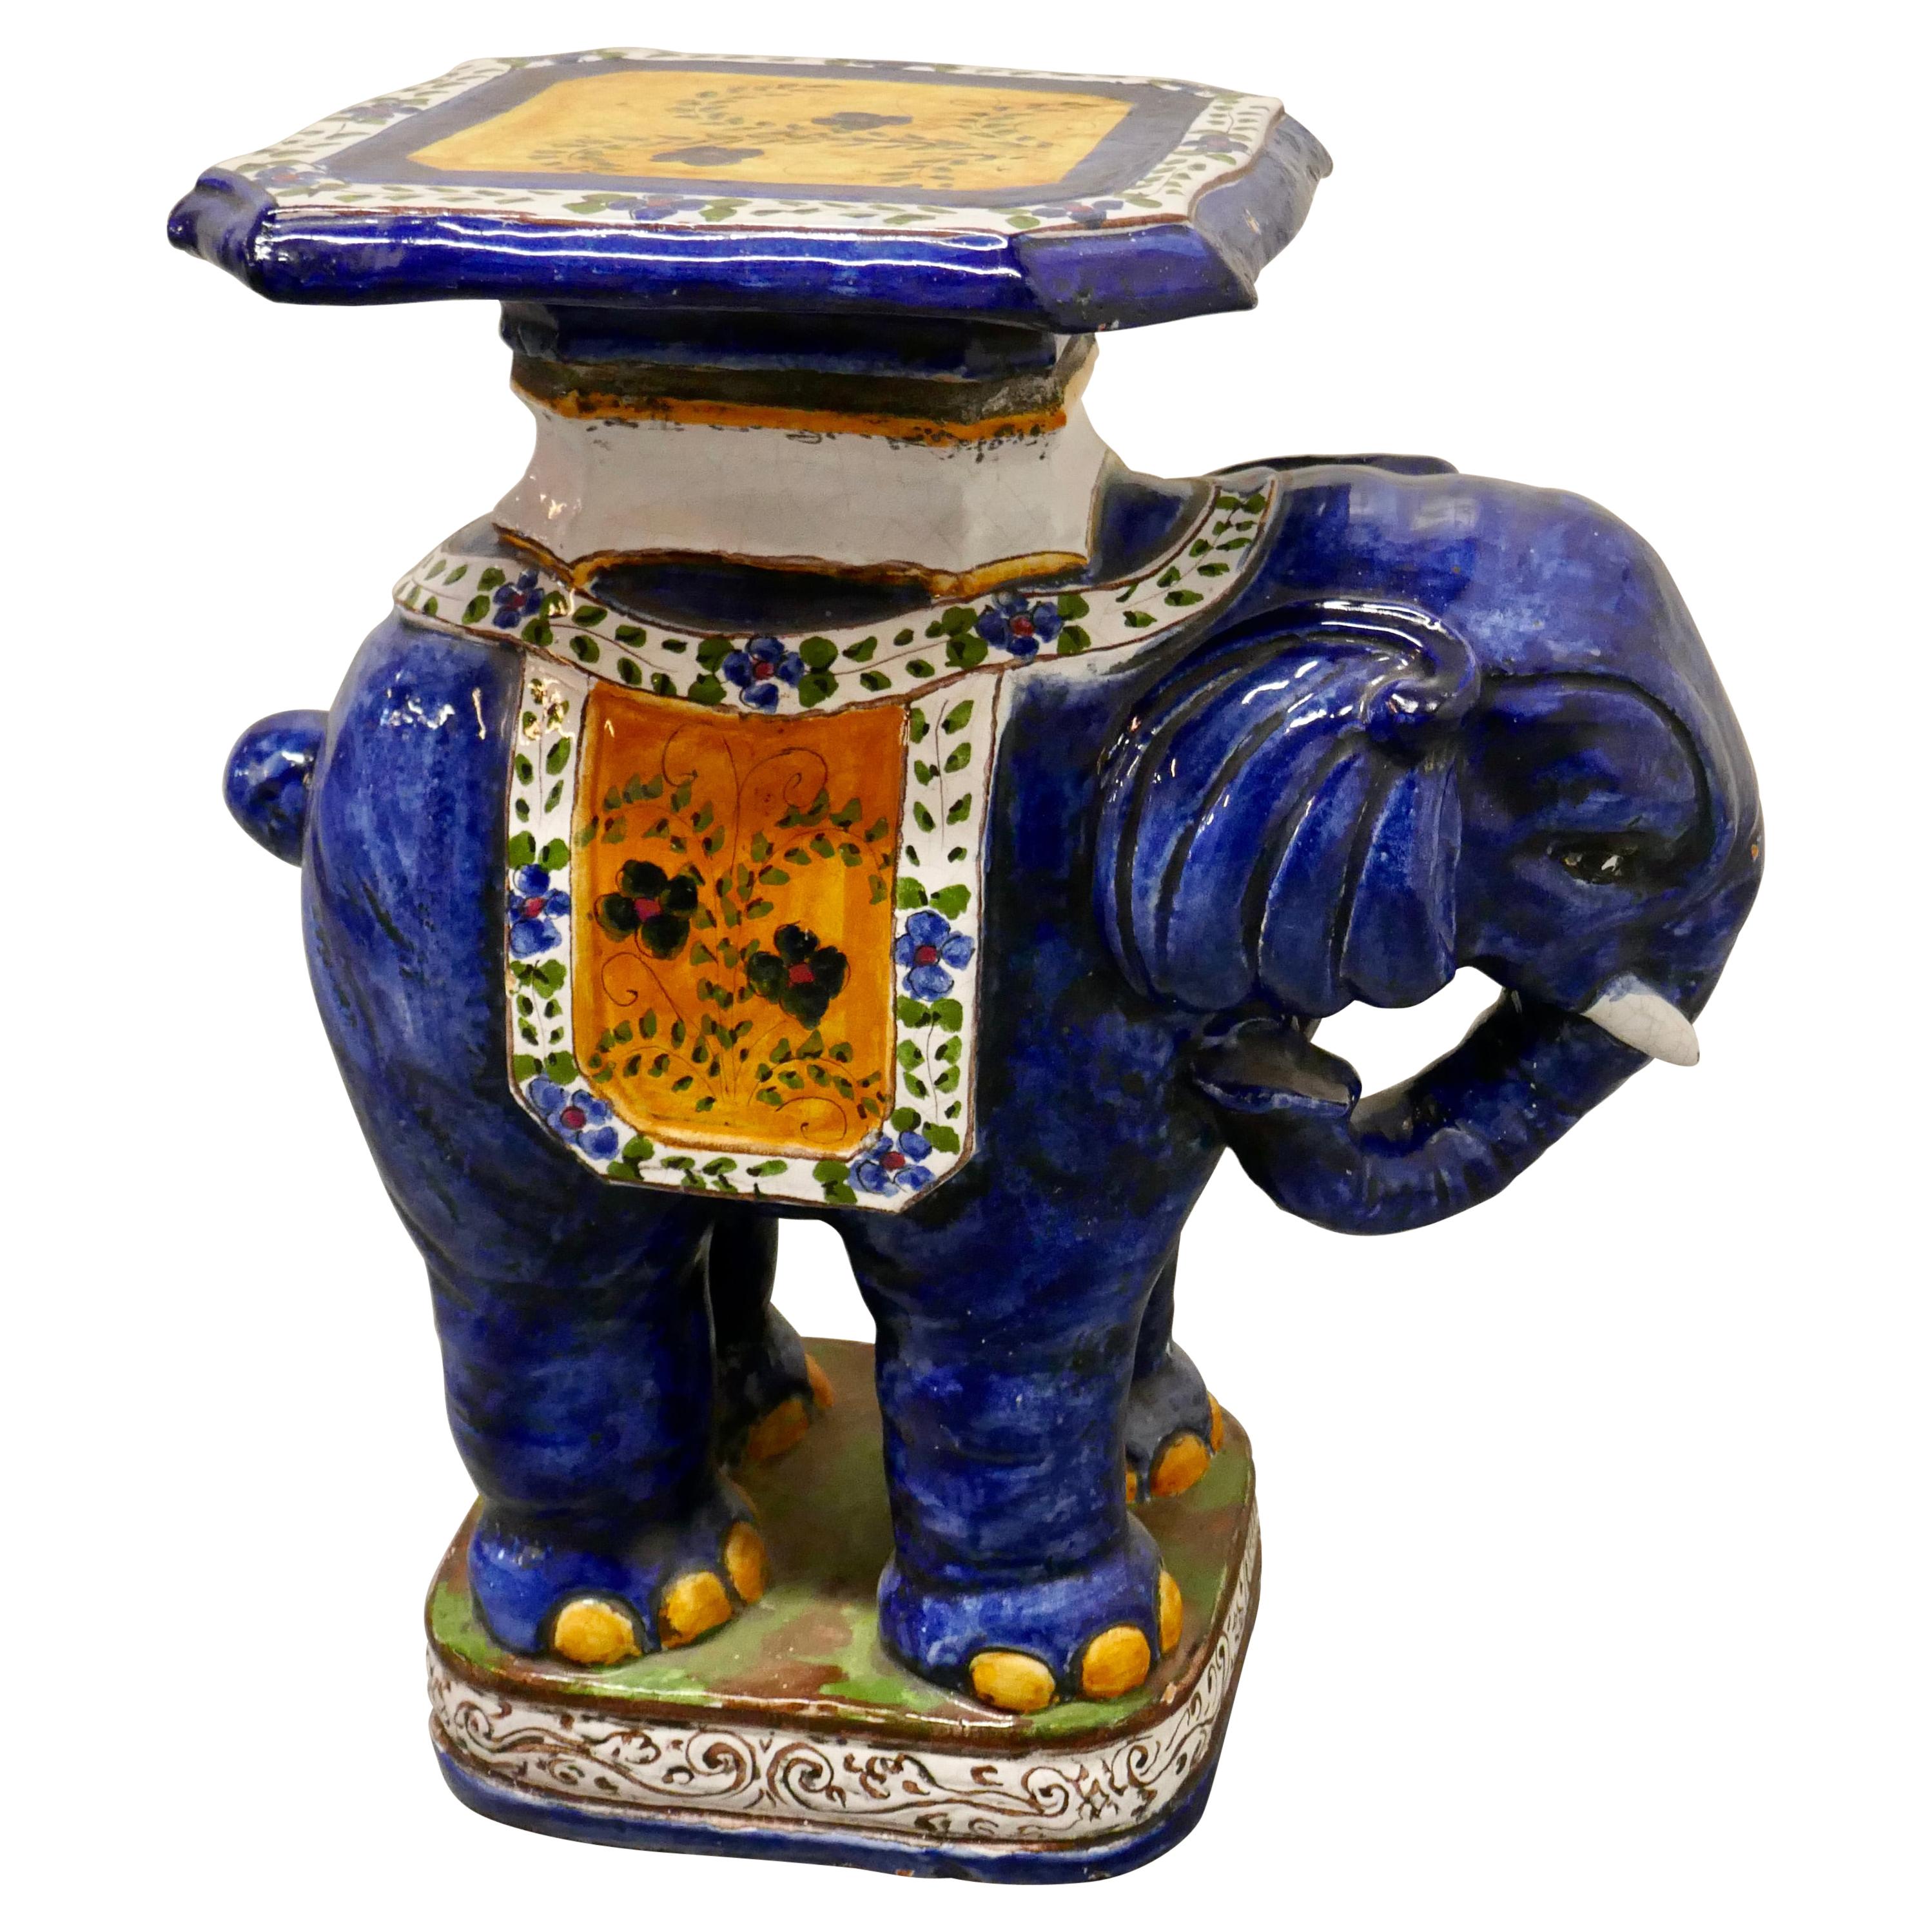 Colourful North African Terra Cotta Elephant Statue Seat For Sale